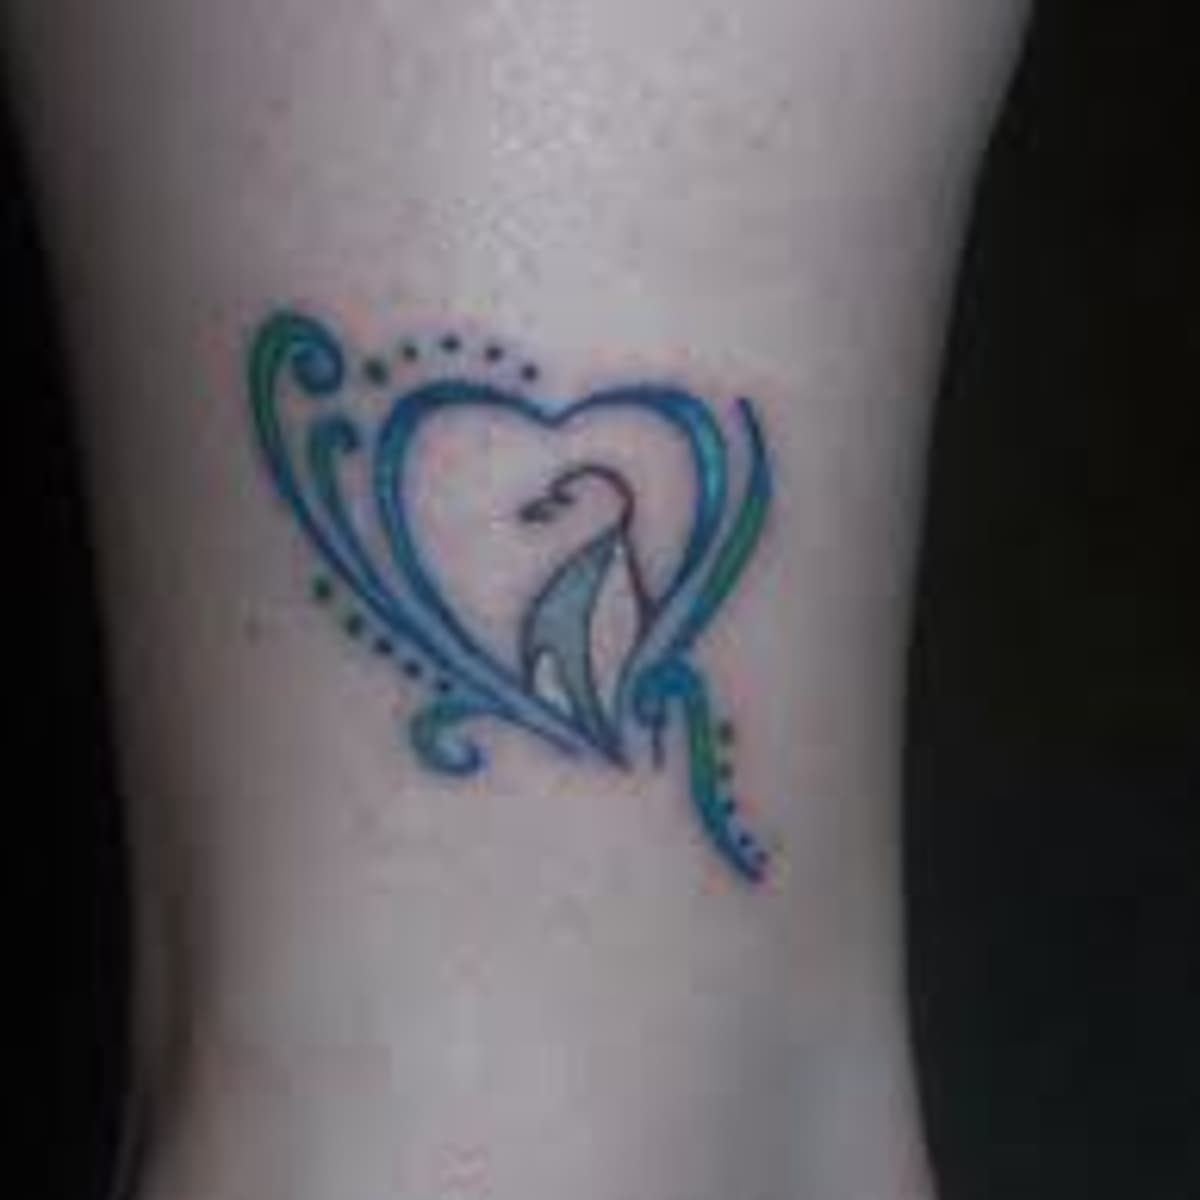 Penguin Tattoos And DesignsPenguin Tattoo Meanings And IdeasPenguin Tattoo  Pictures  HubPages